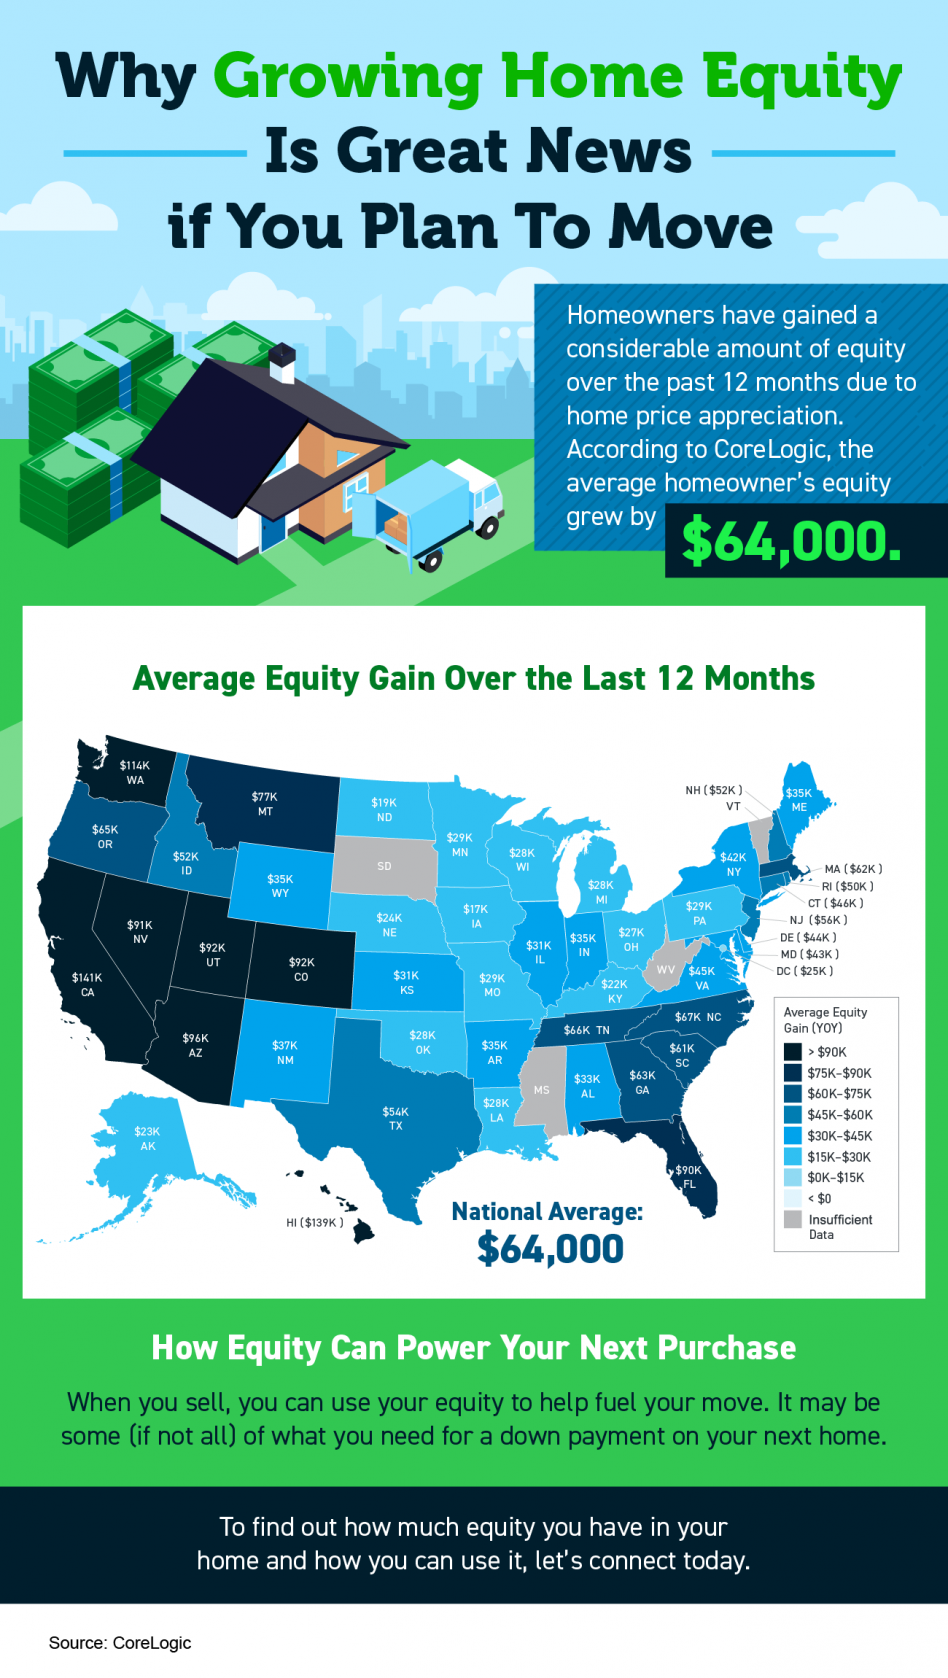 Growing home equity is great news if you plan to move